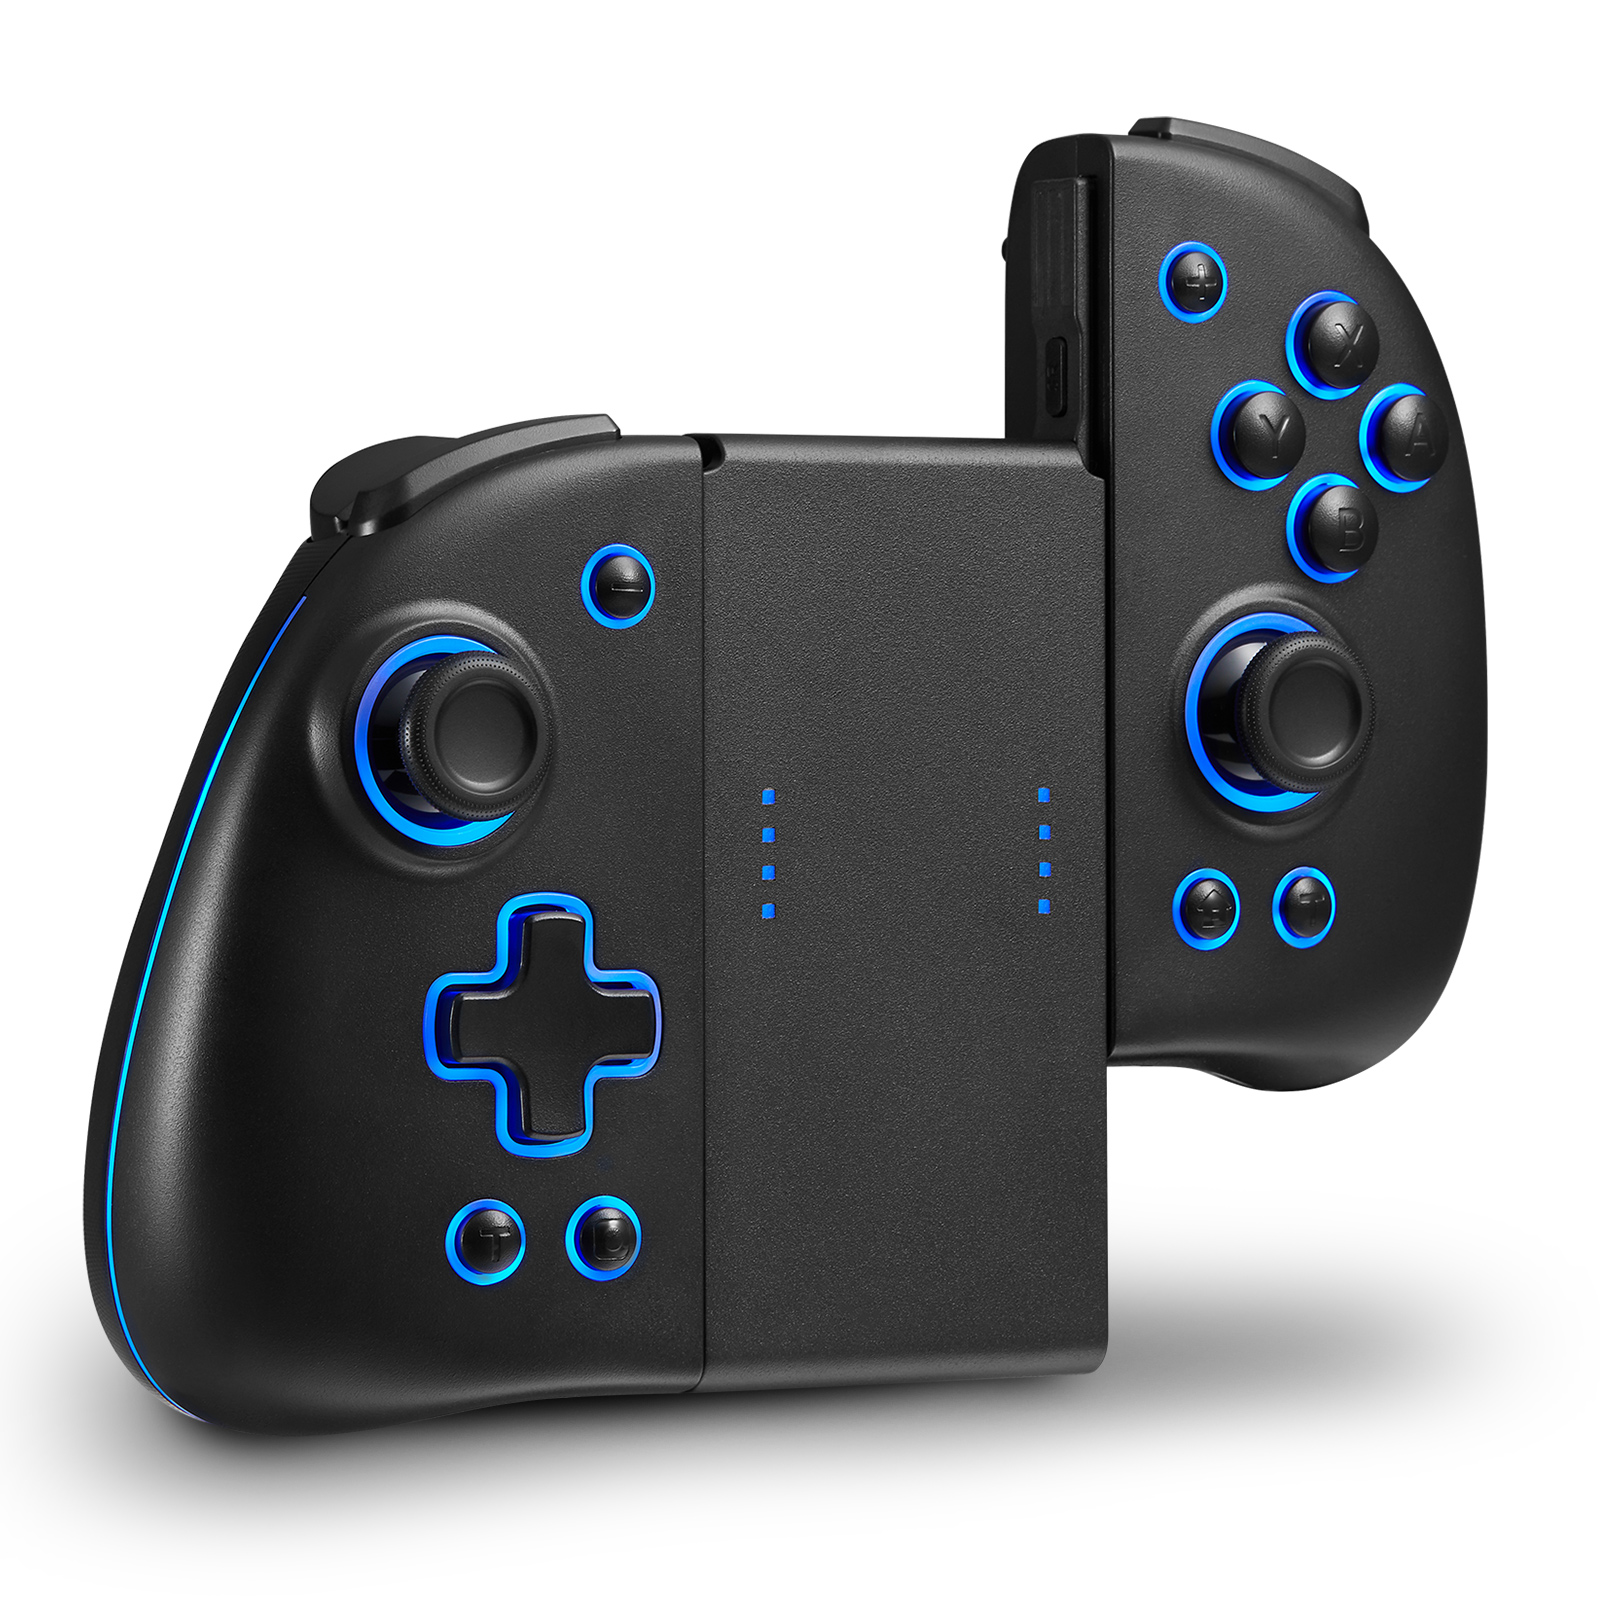 MANETTE GAMING SPIRIT OF GAMER PGP PS4 BLUETOOTH -NOIR - WIKI High Tech  Provider